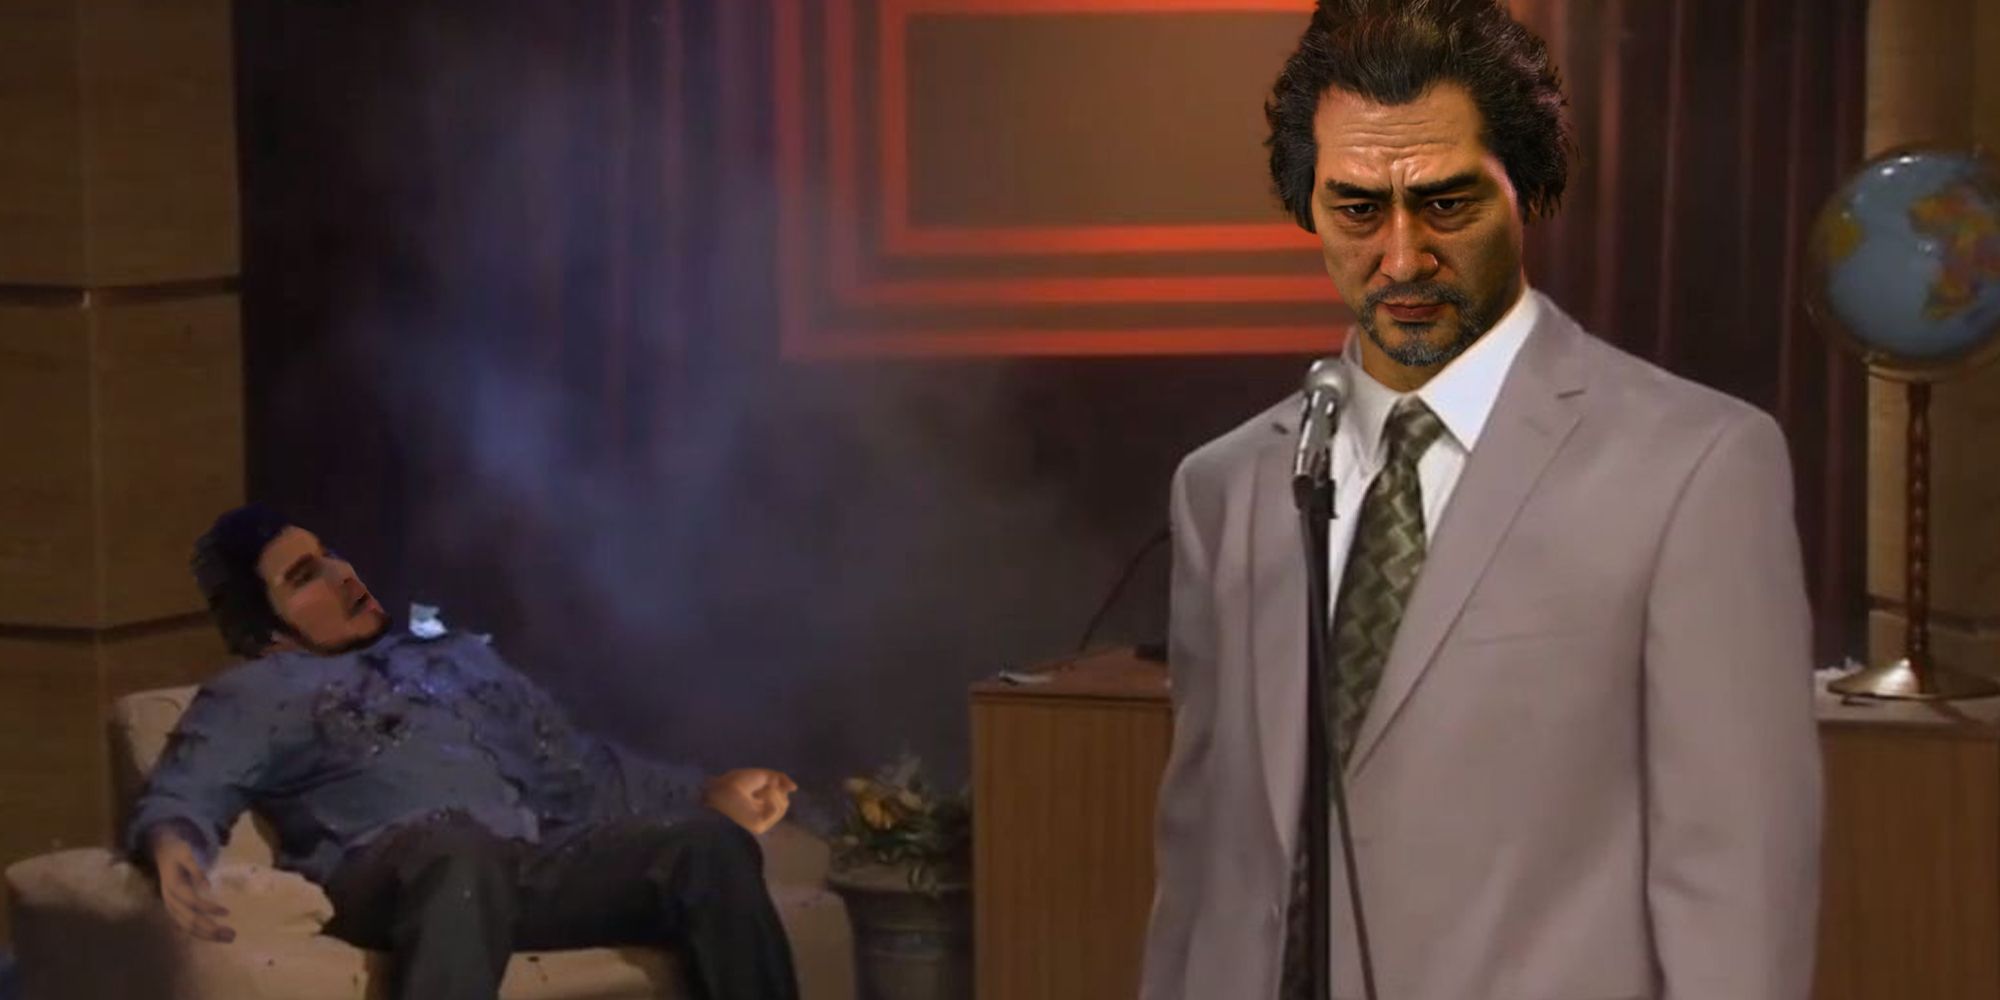 Eric Andre Show 'why would X do that' meme after gunshot, with Adachi and Ichiban